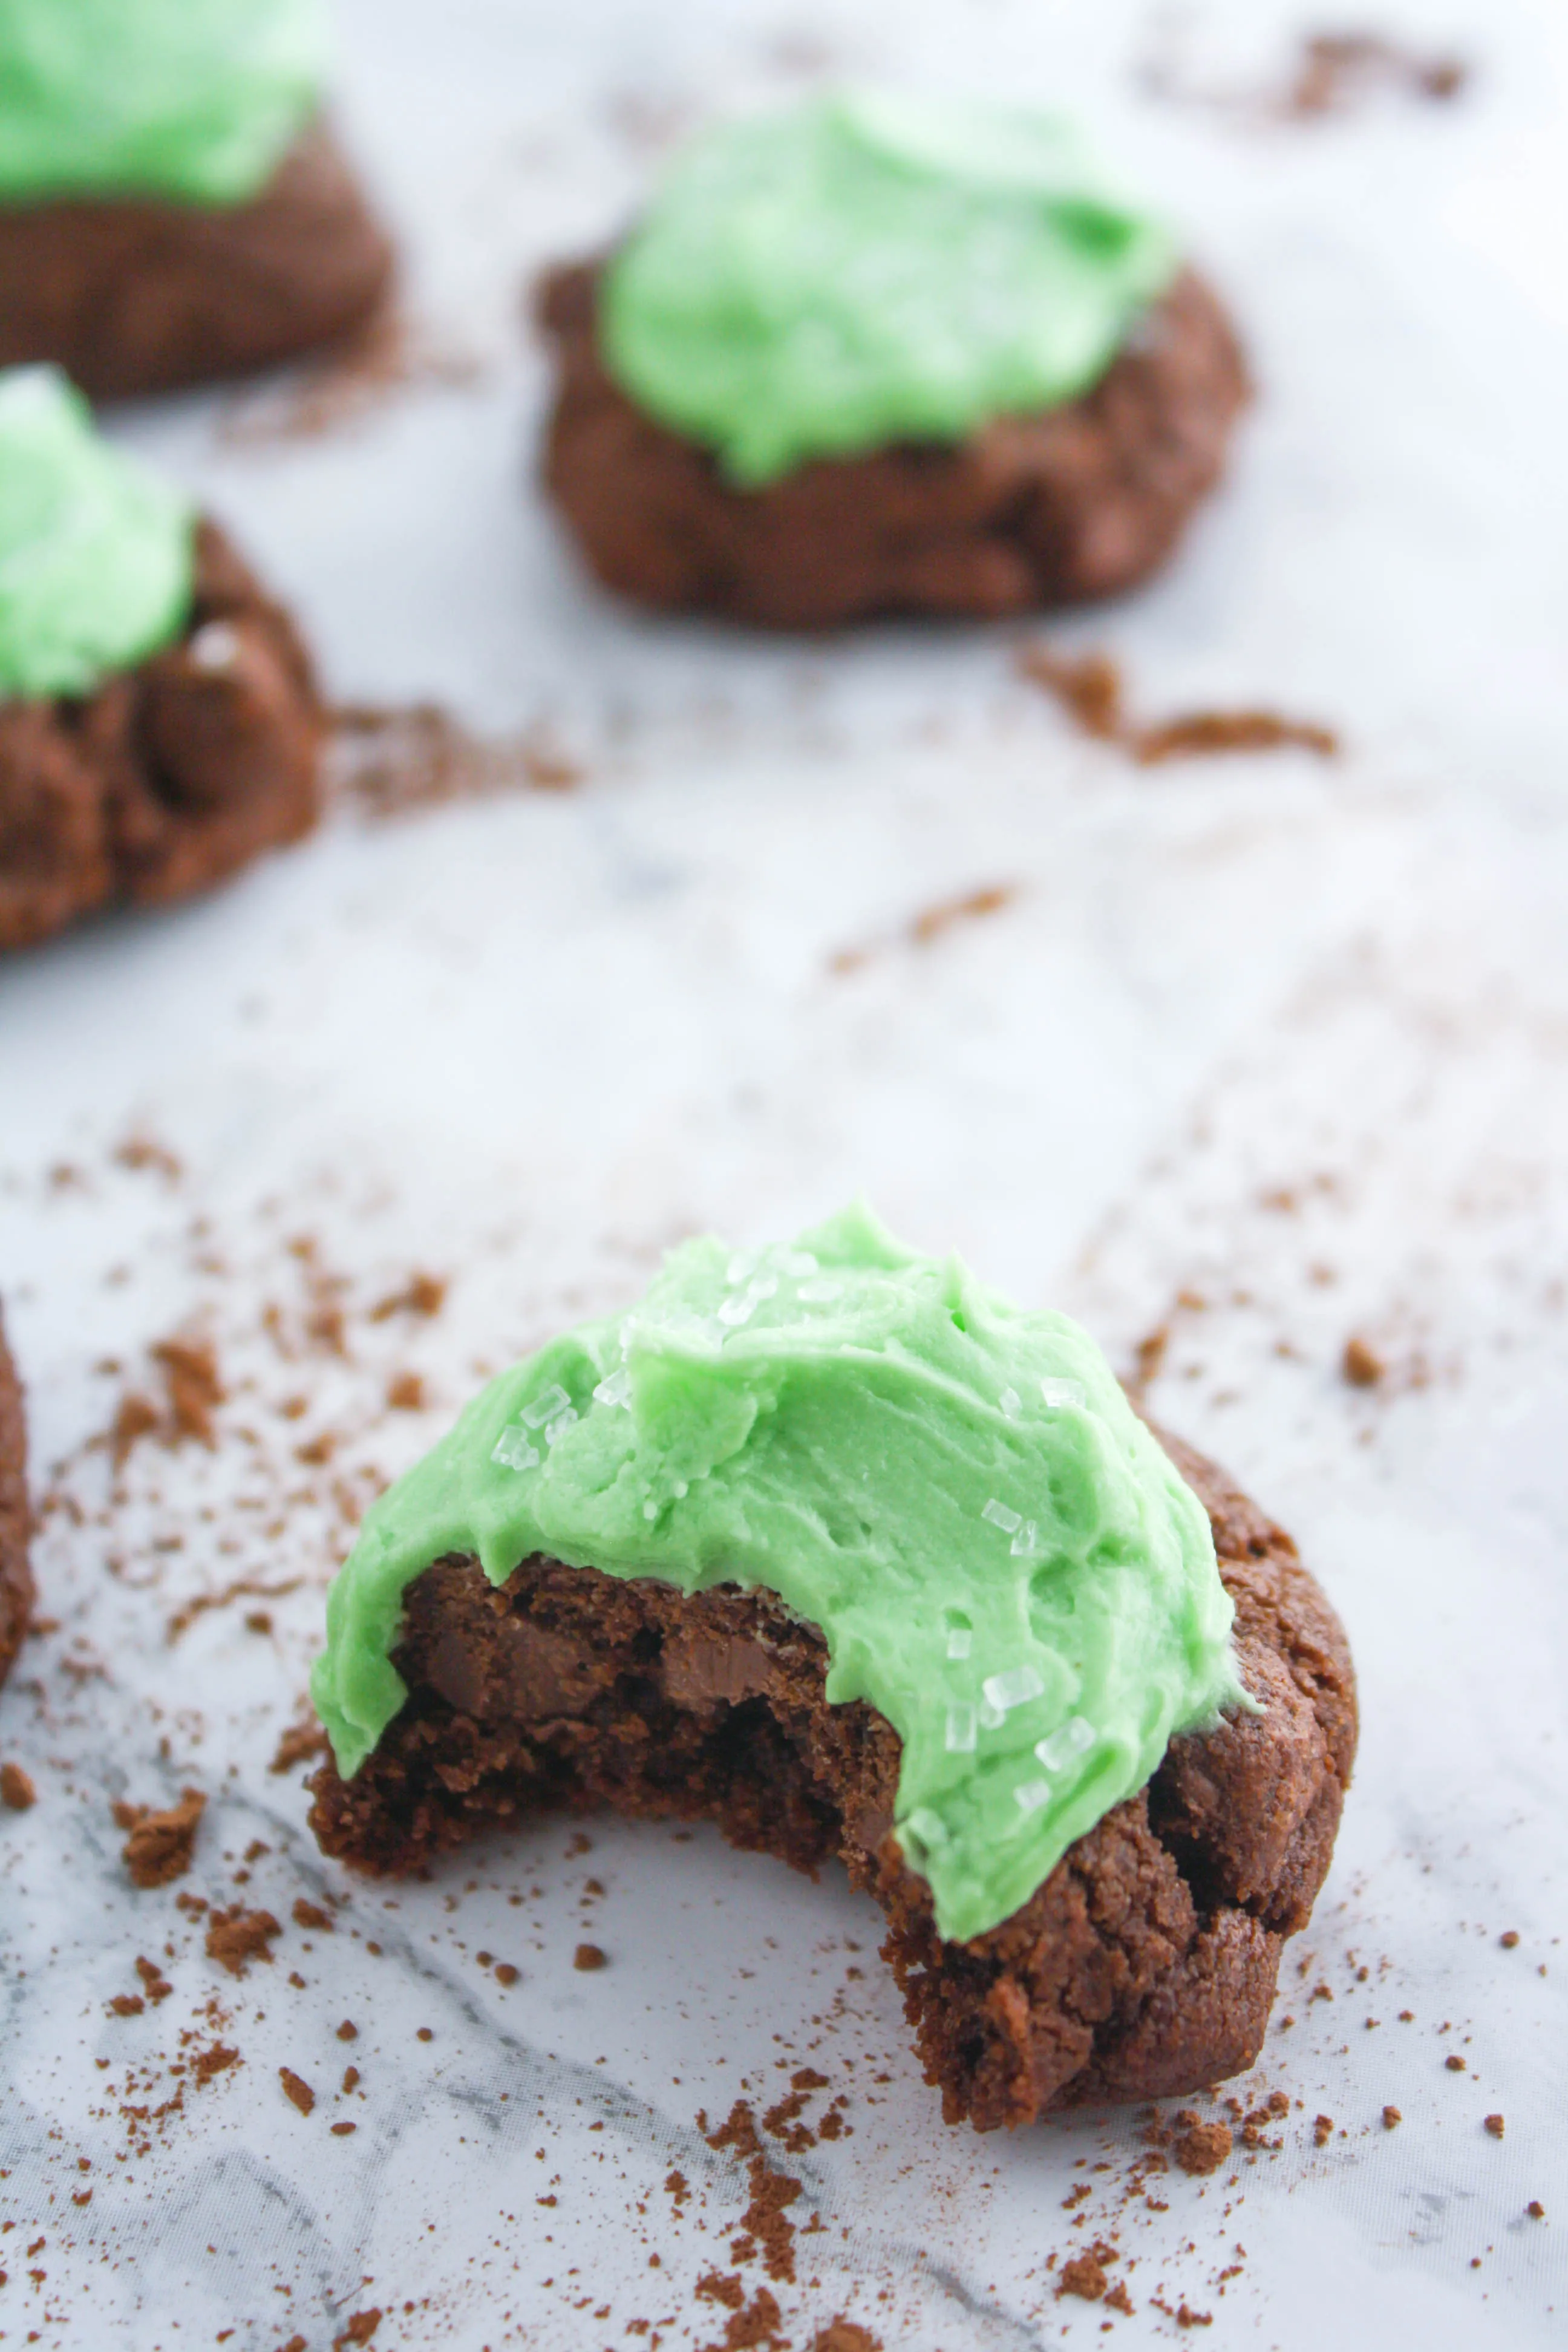 Double Chocolate Cookies with Baileys Buttercream Frosting make fun treats for the day! Get into the spirit of St. Patrick's Day with these Double Chocolate Cookies with Baileys Buttercream Frosting. 